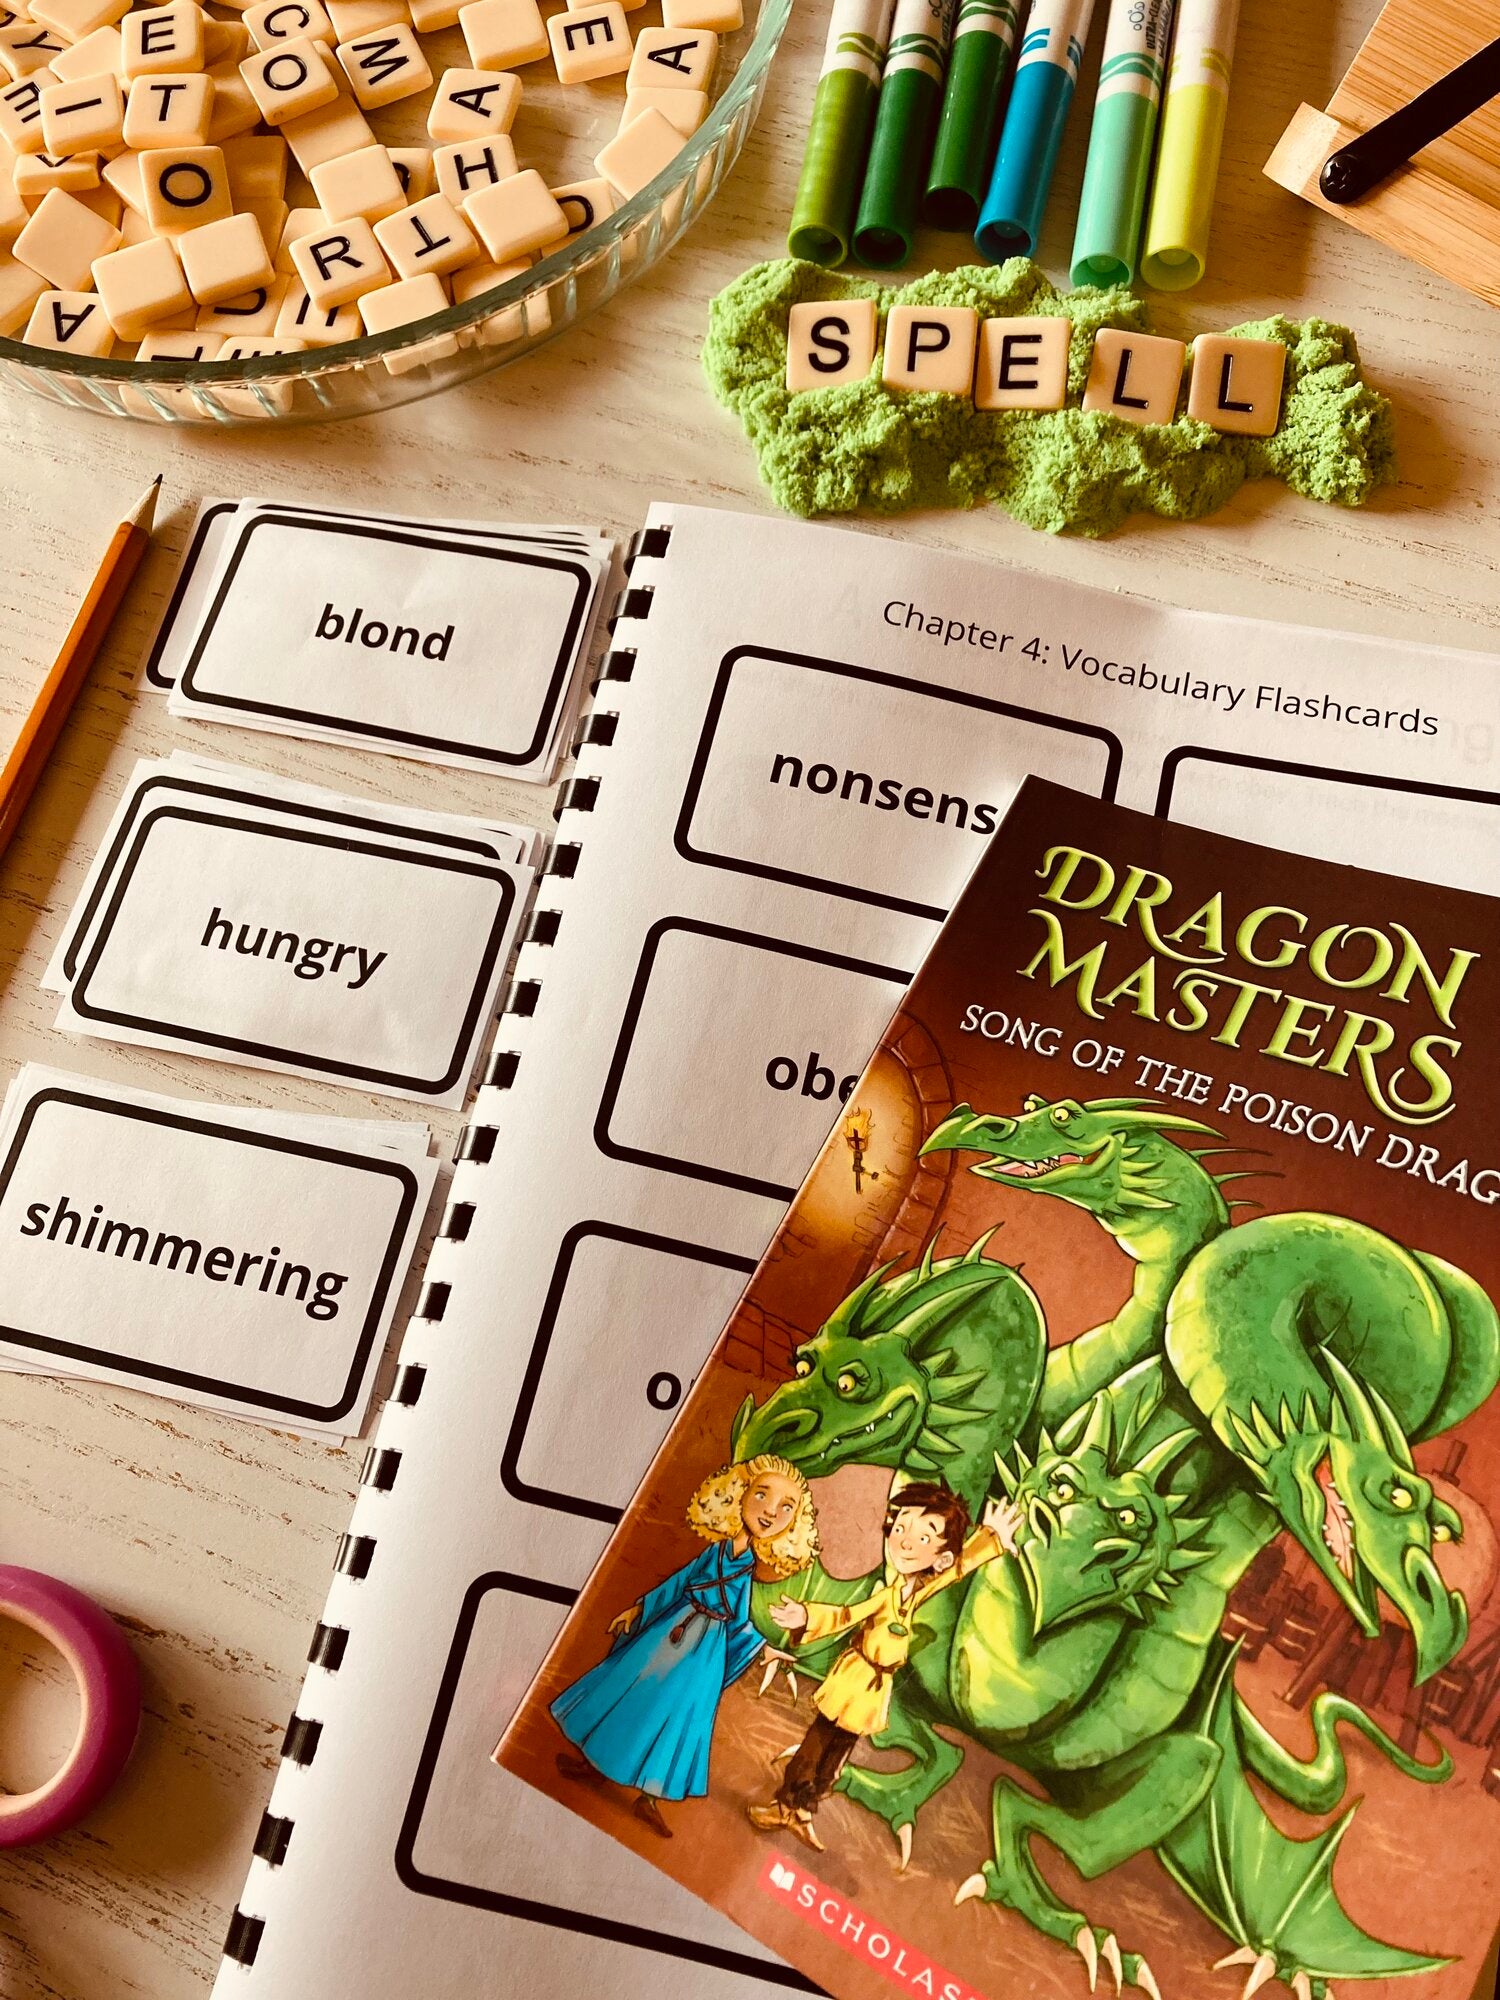 The Dragon Masters Novel Study Guide: Book 5 "Song of the Poison Dragon"